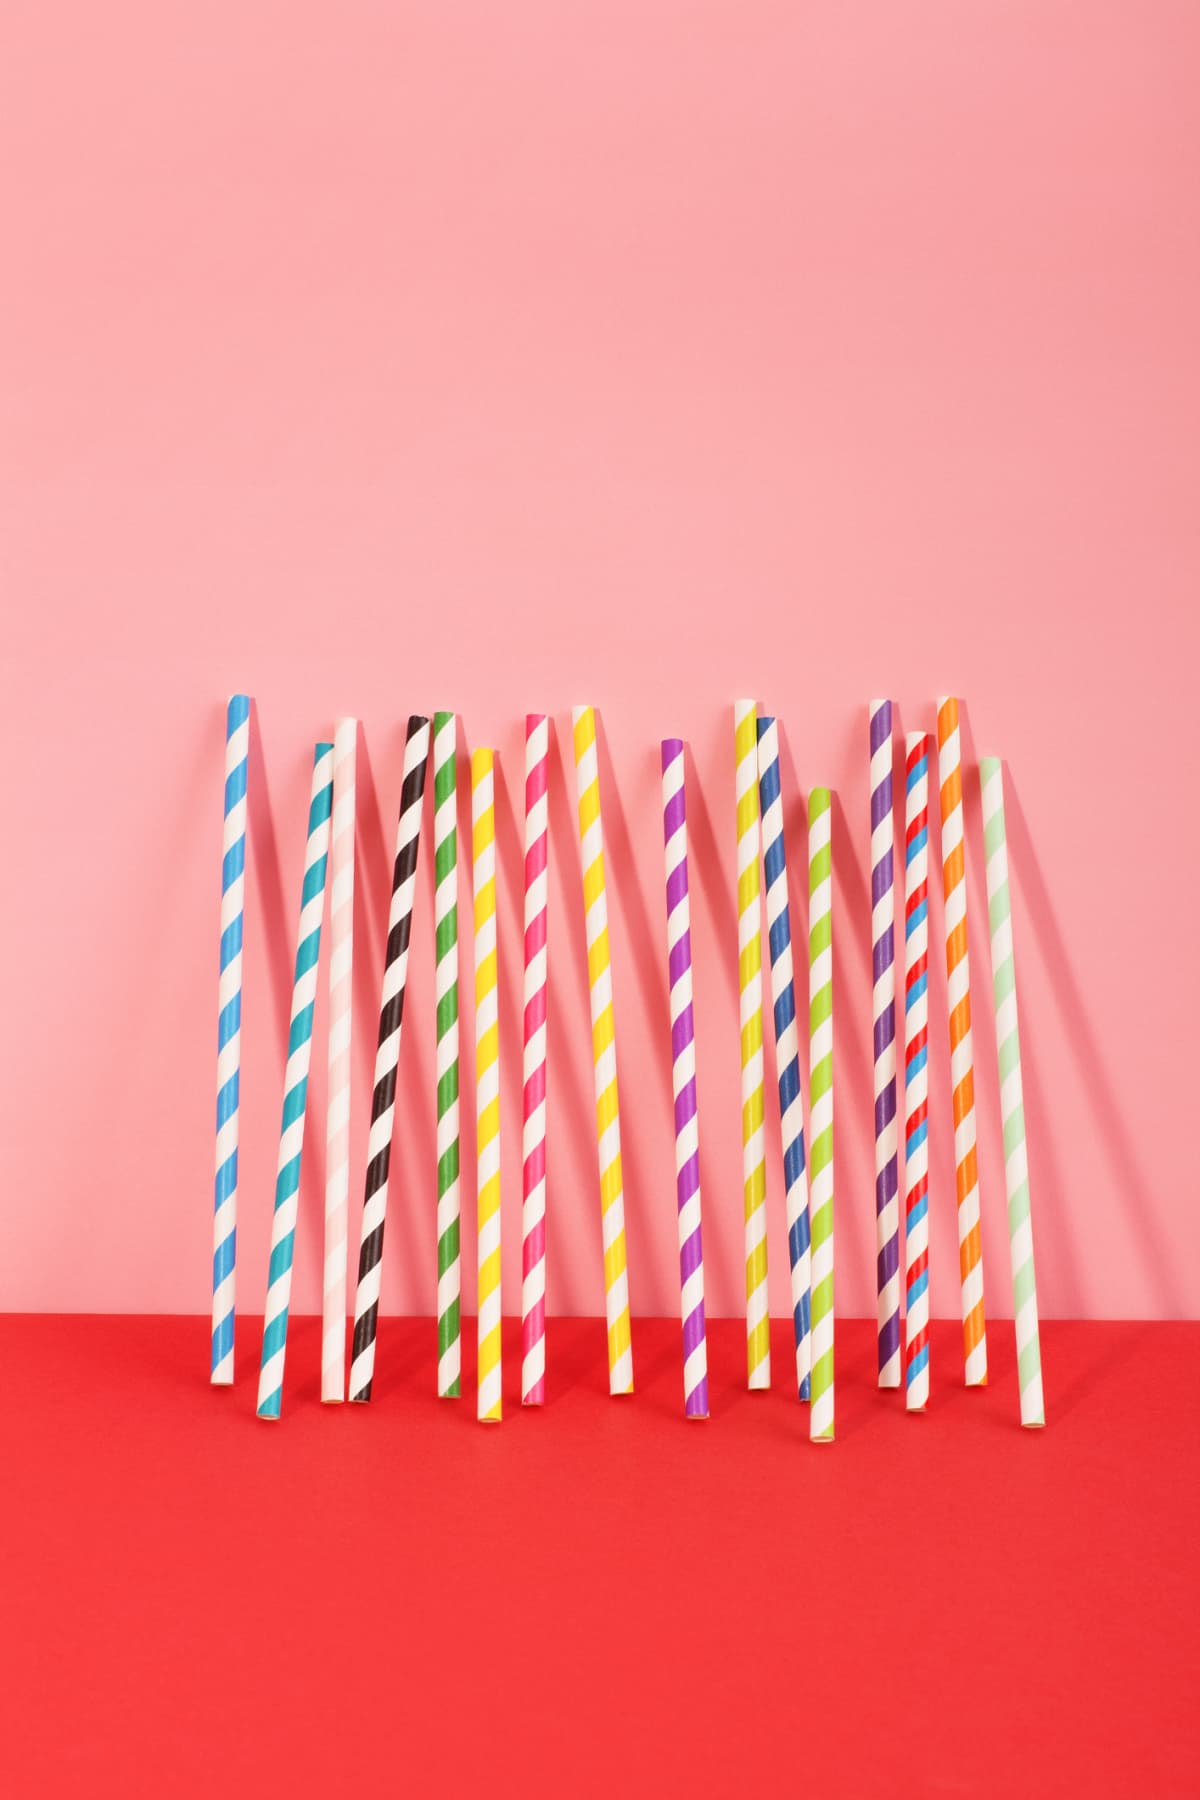 Still life of multicolour straws shot on pink and red background